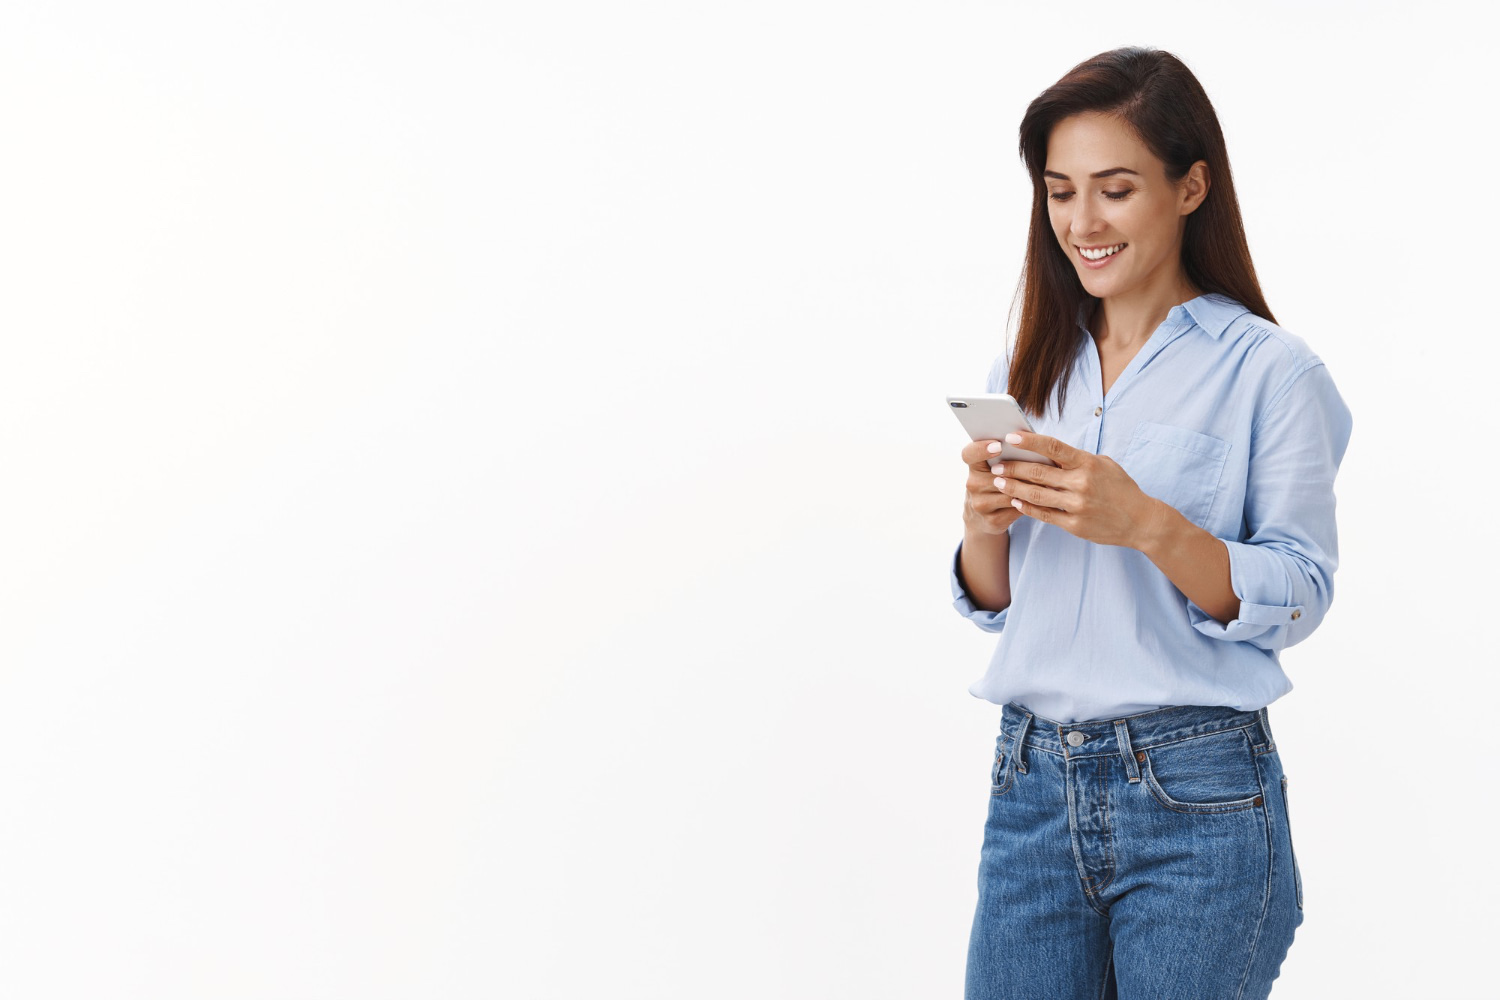 carefree cheerful female entrepreneur waiting take away coffee order lunch online app smiling delighted hold smartphone read text message phone screen stand white wall upbeat